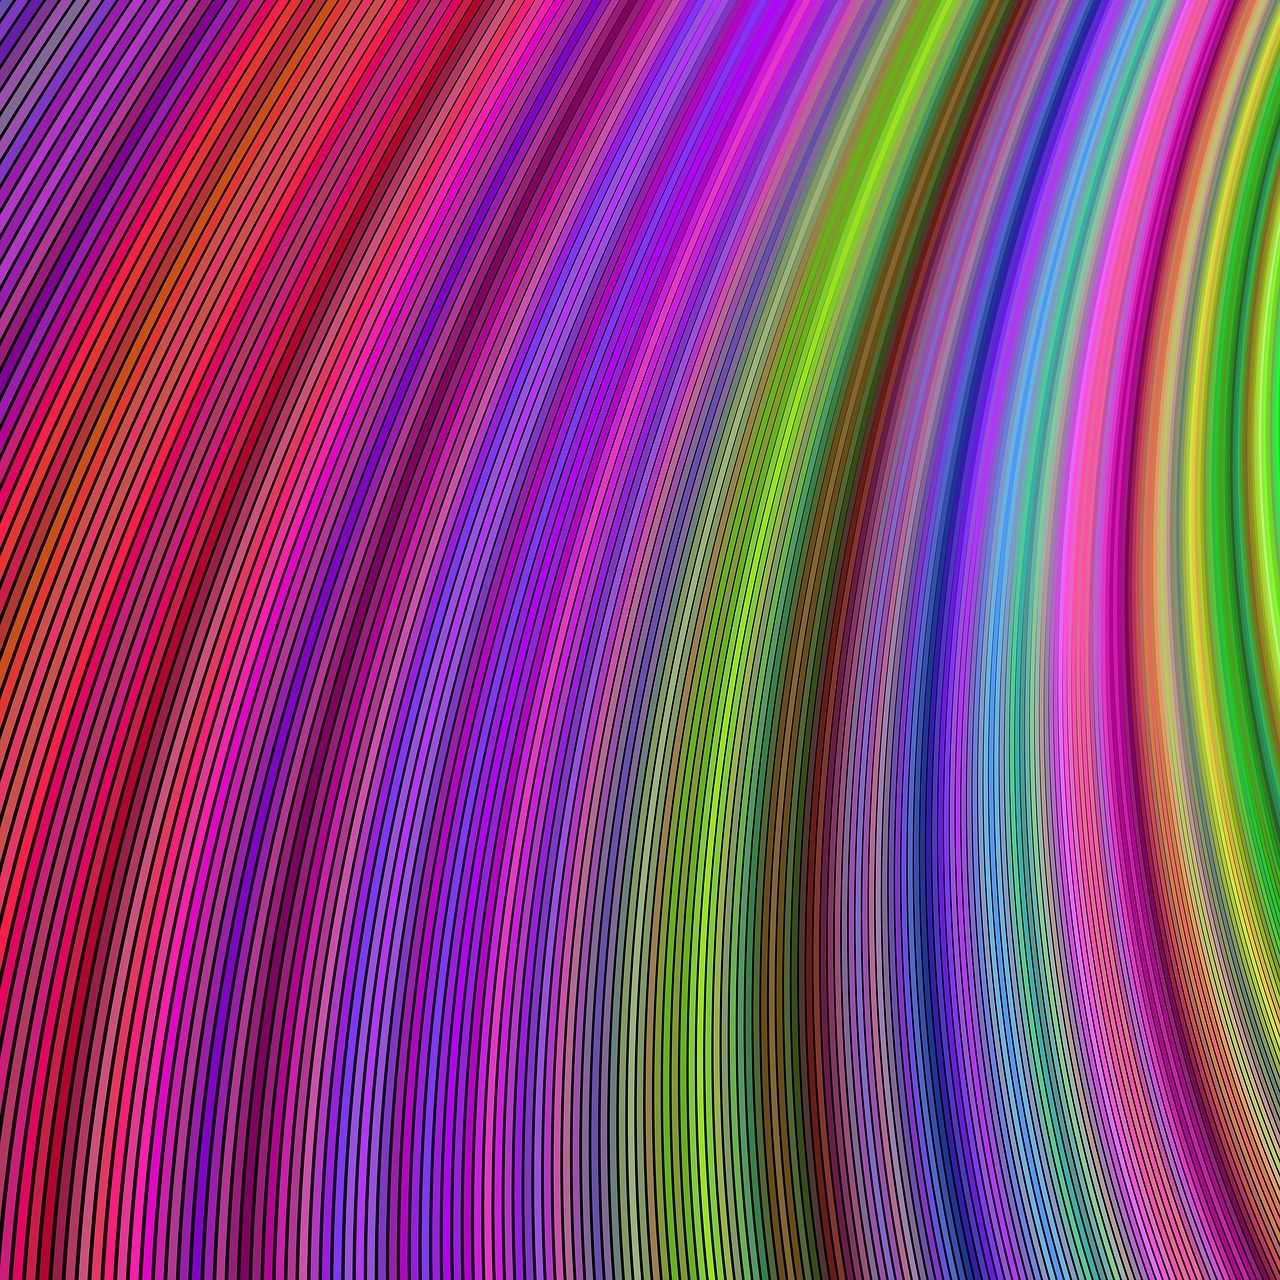 Abstract blurred multicolored swirl radial background spectrum